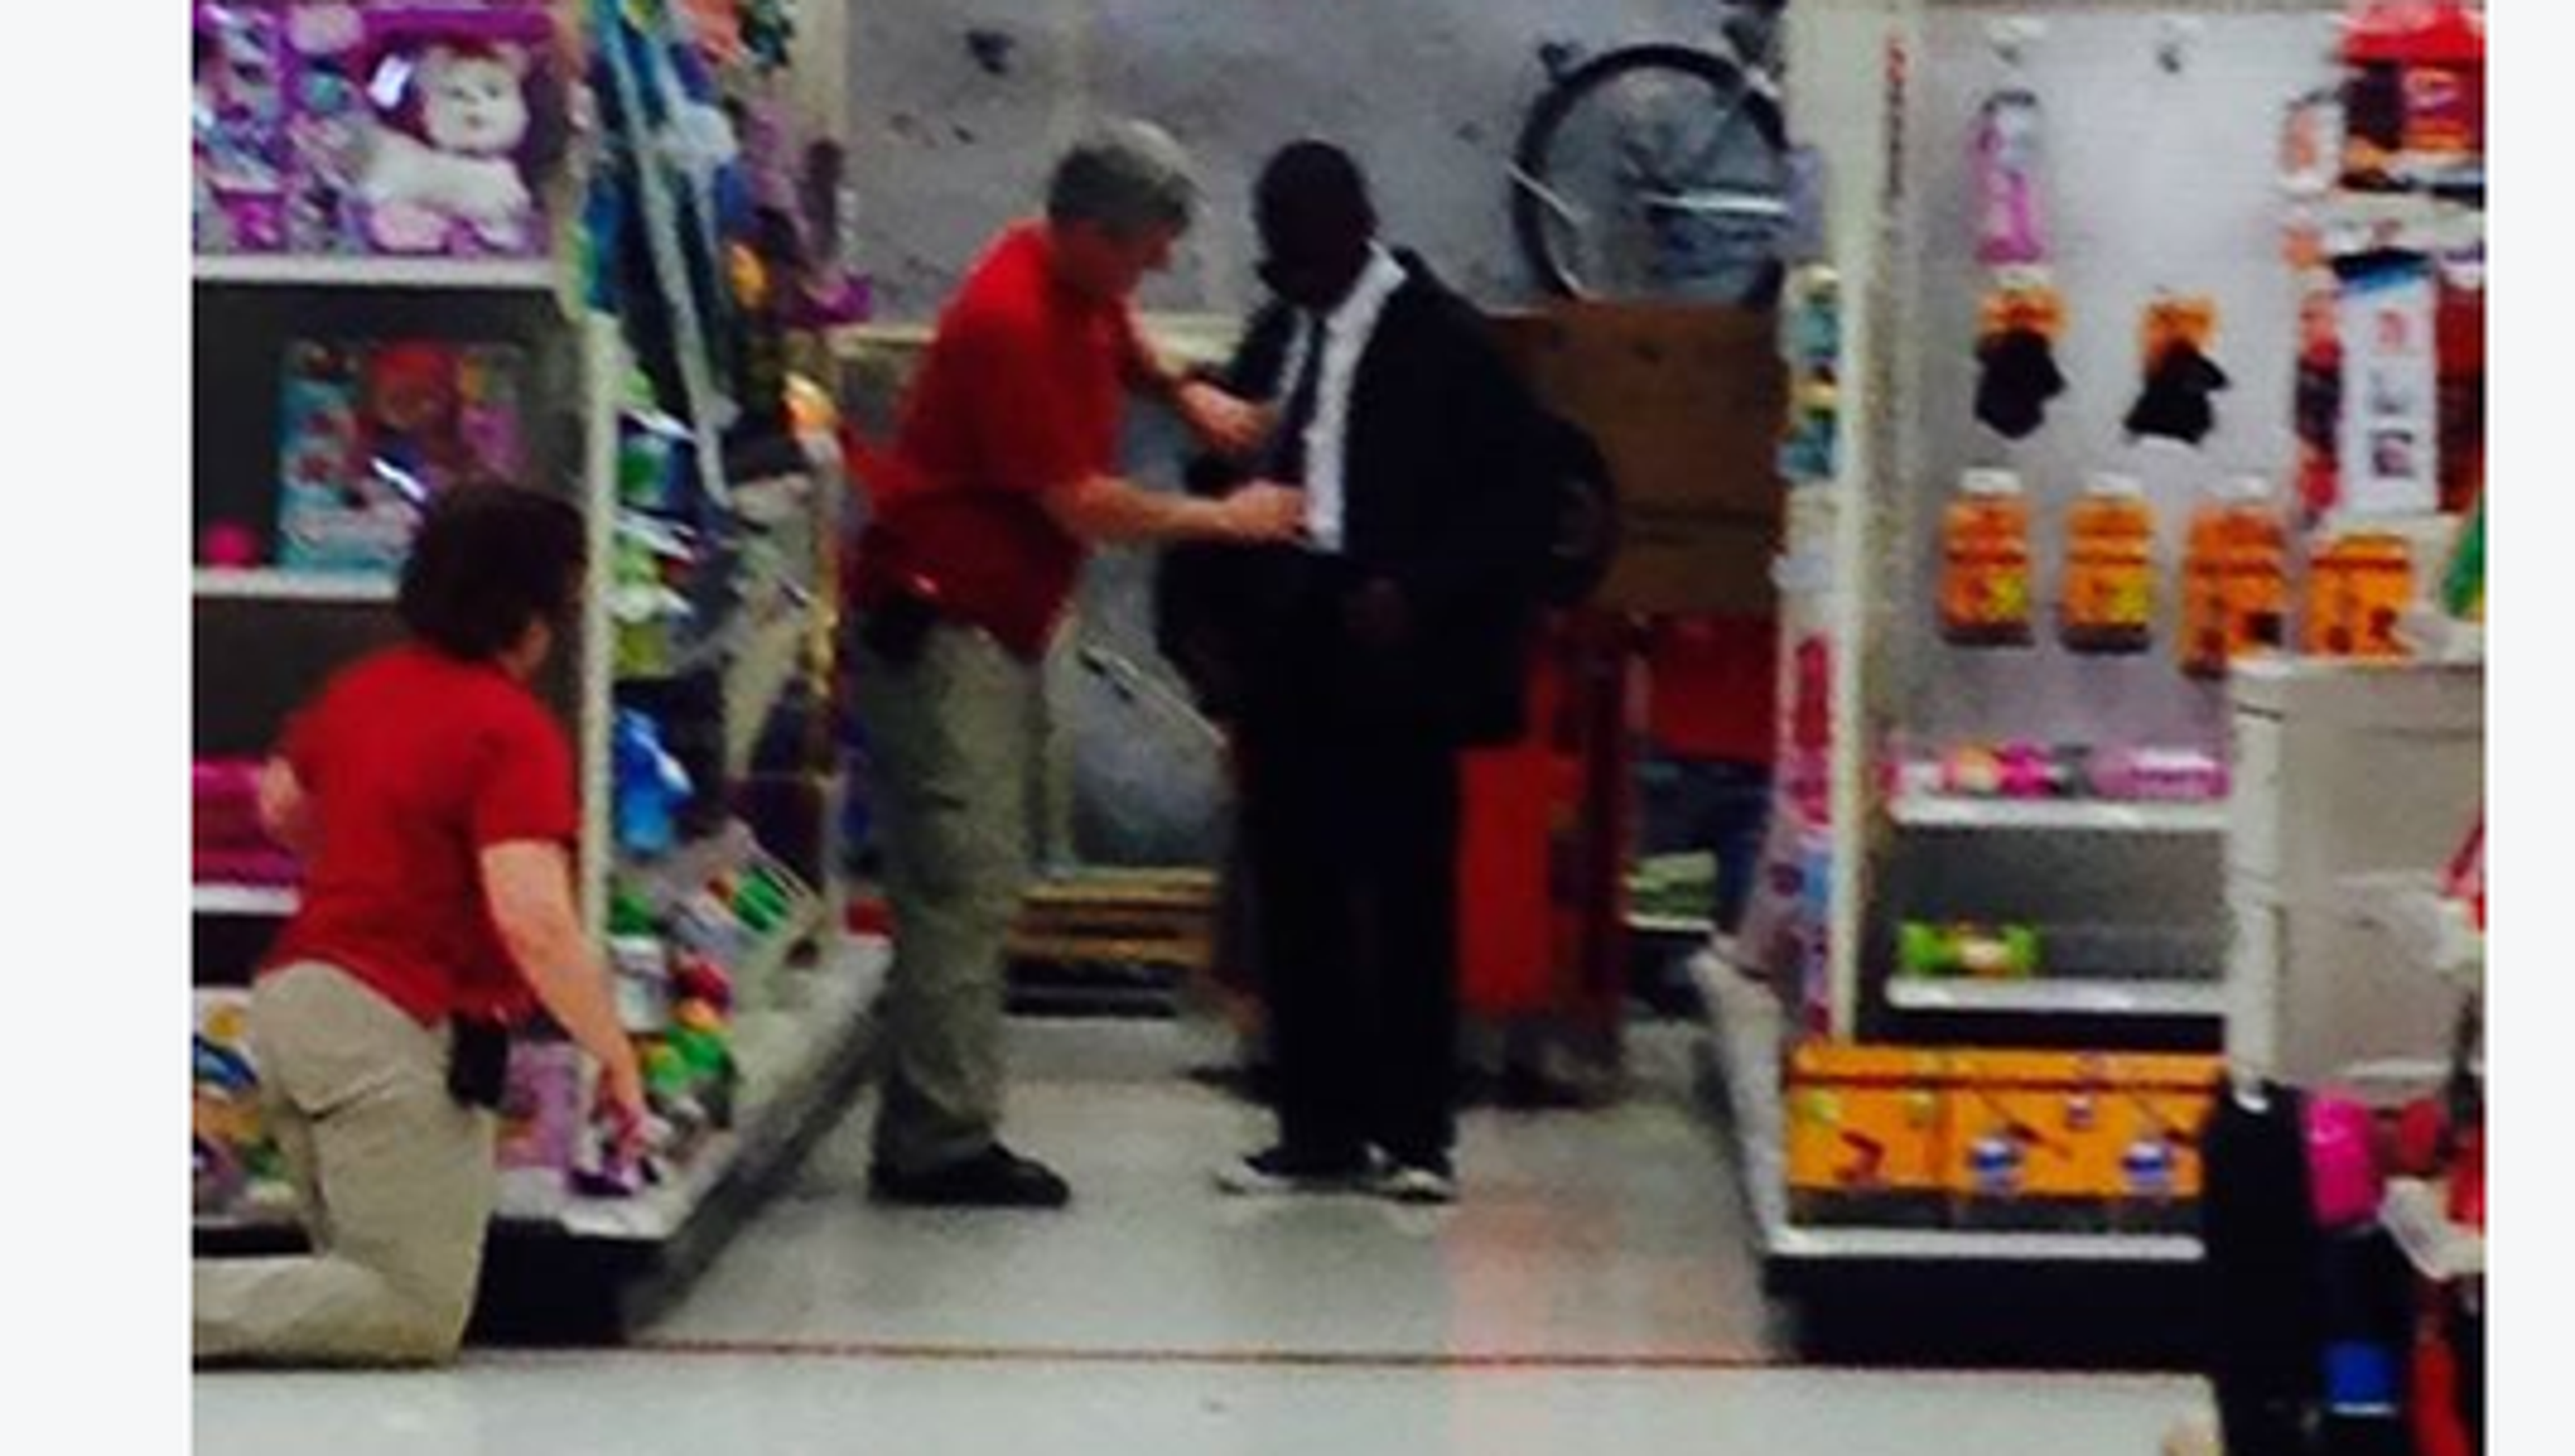 Target worker helps young man tie a tie for interview